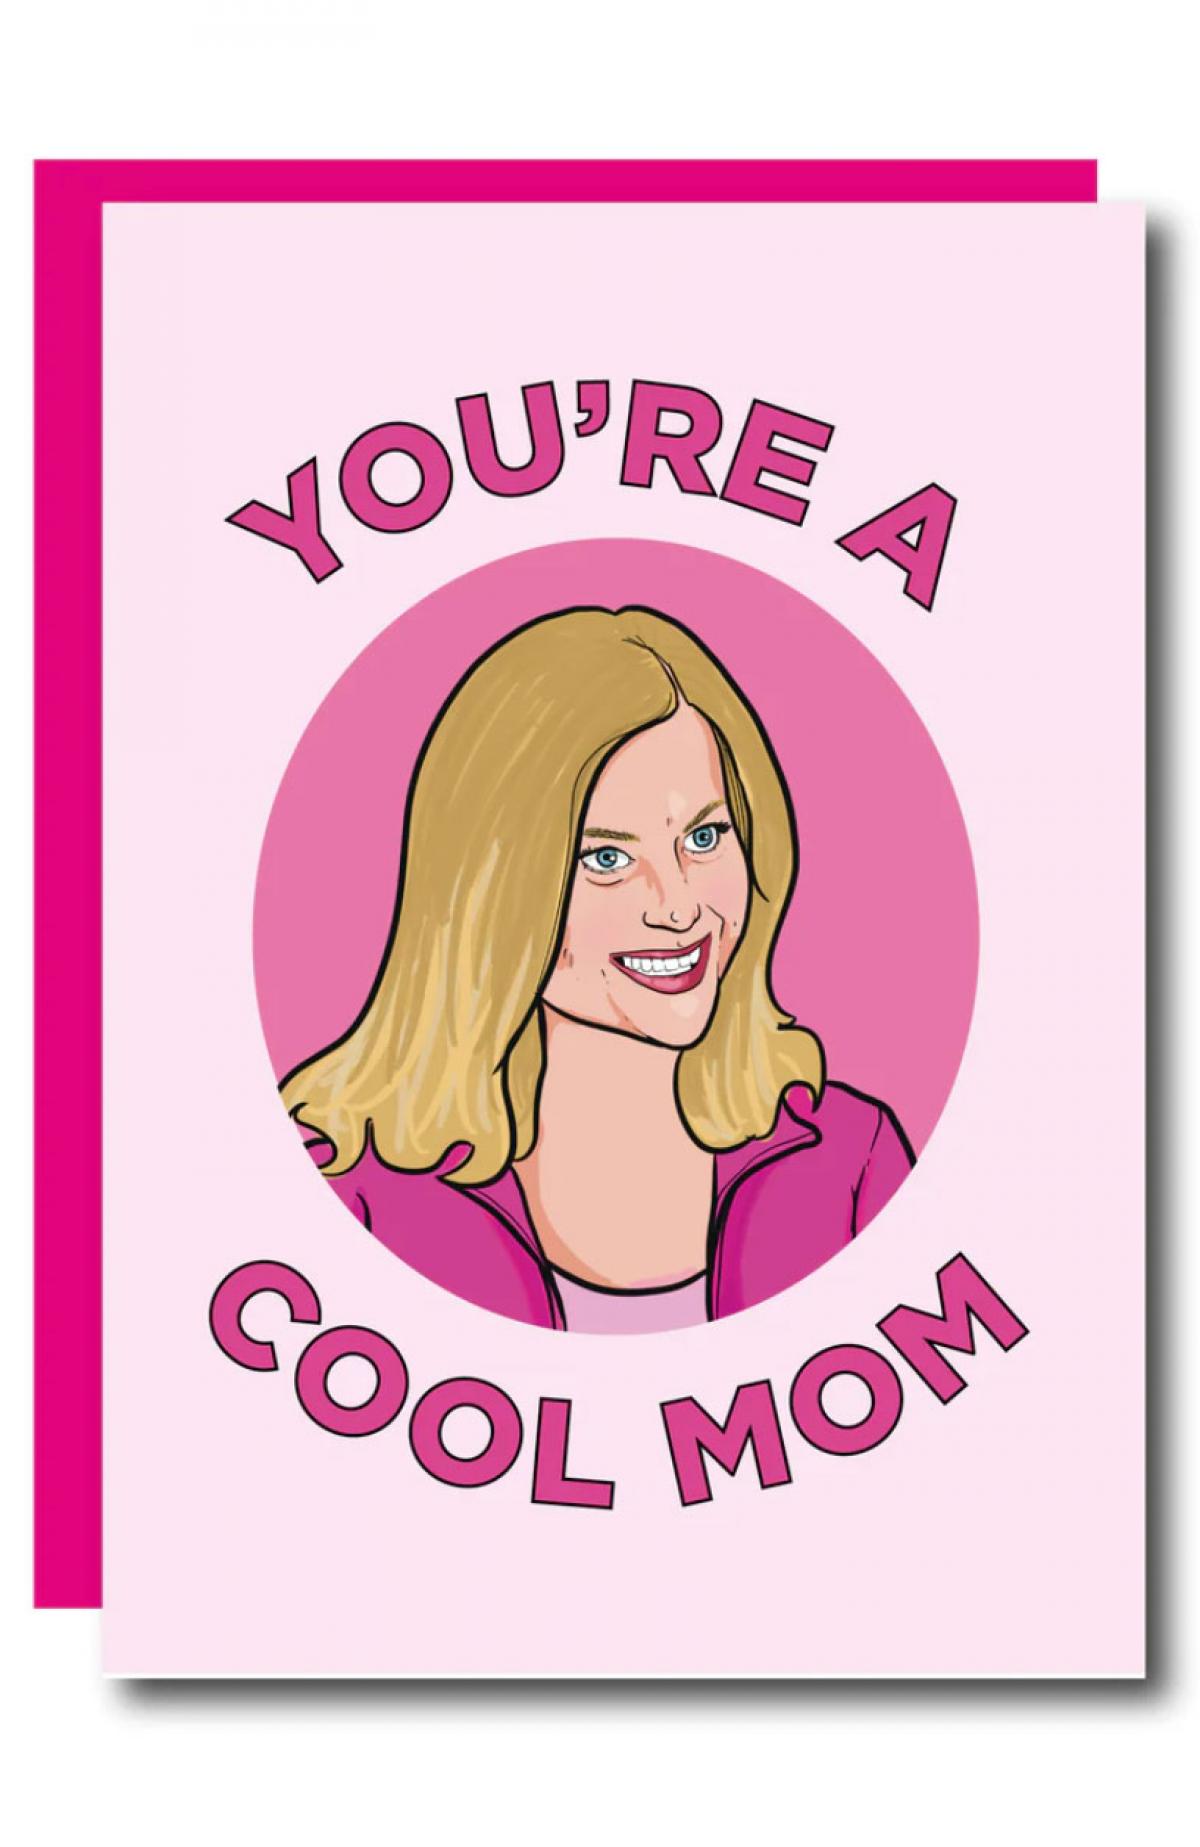 'You're a cool mom'